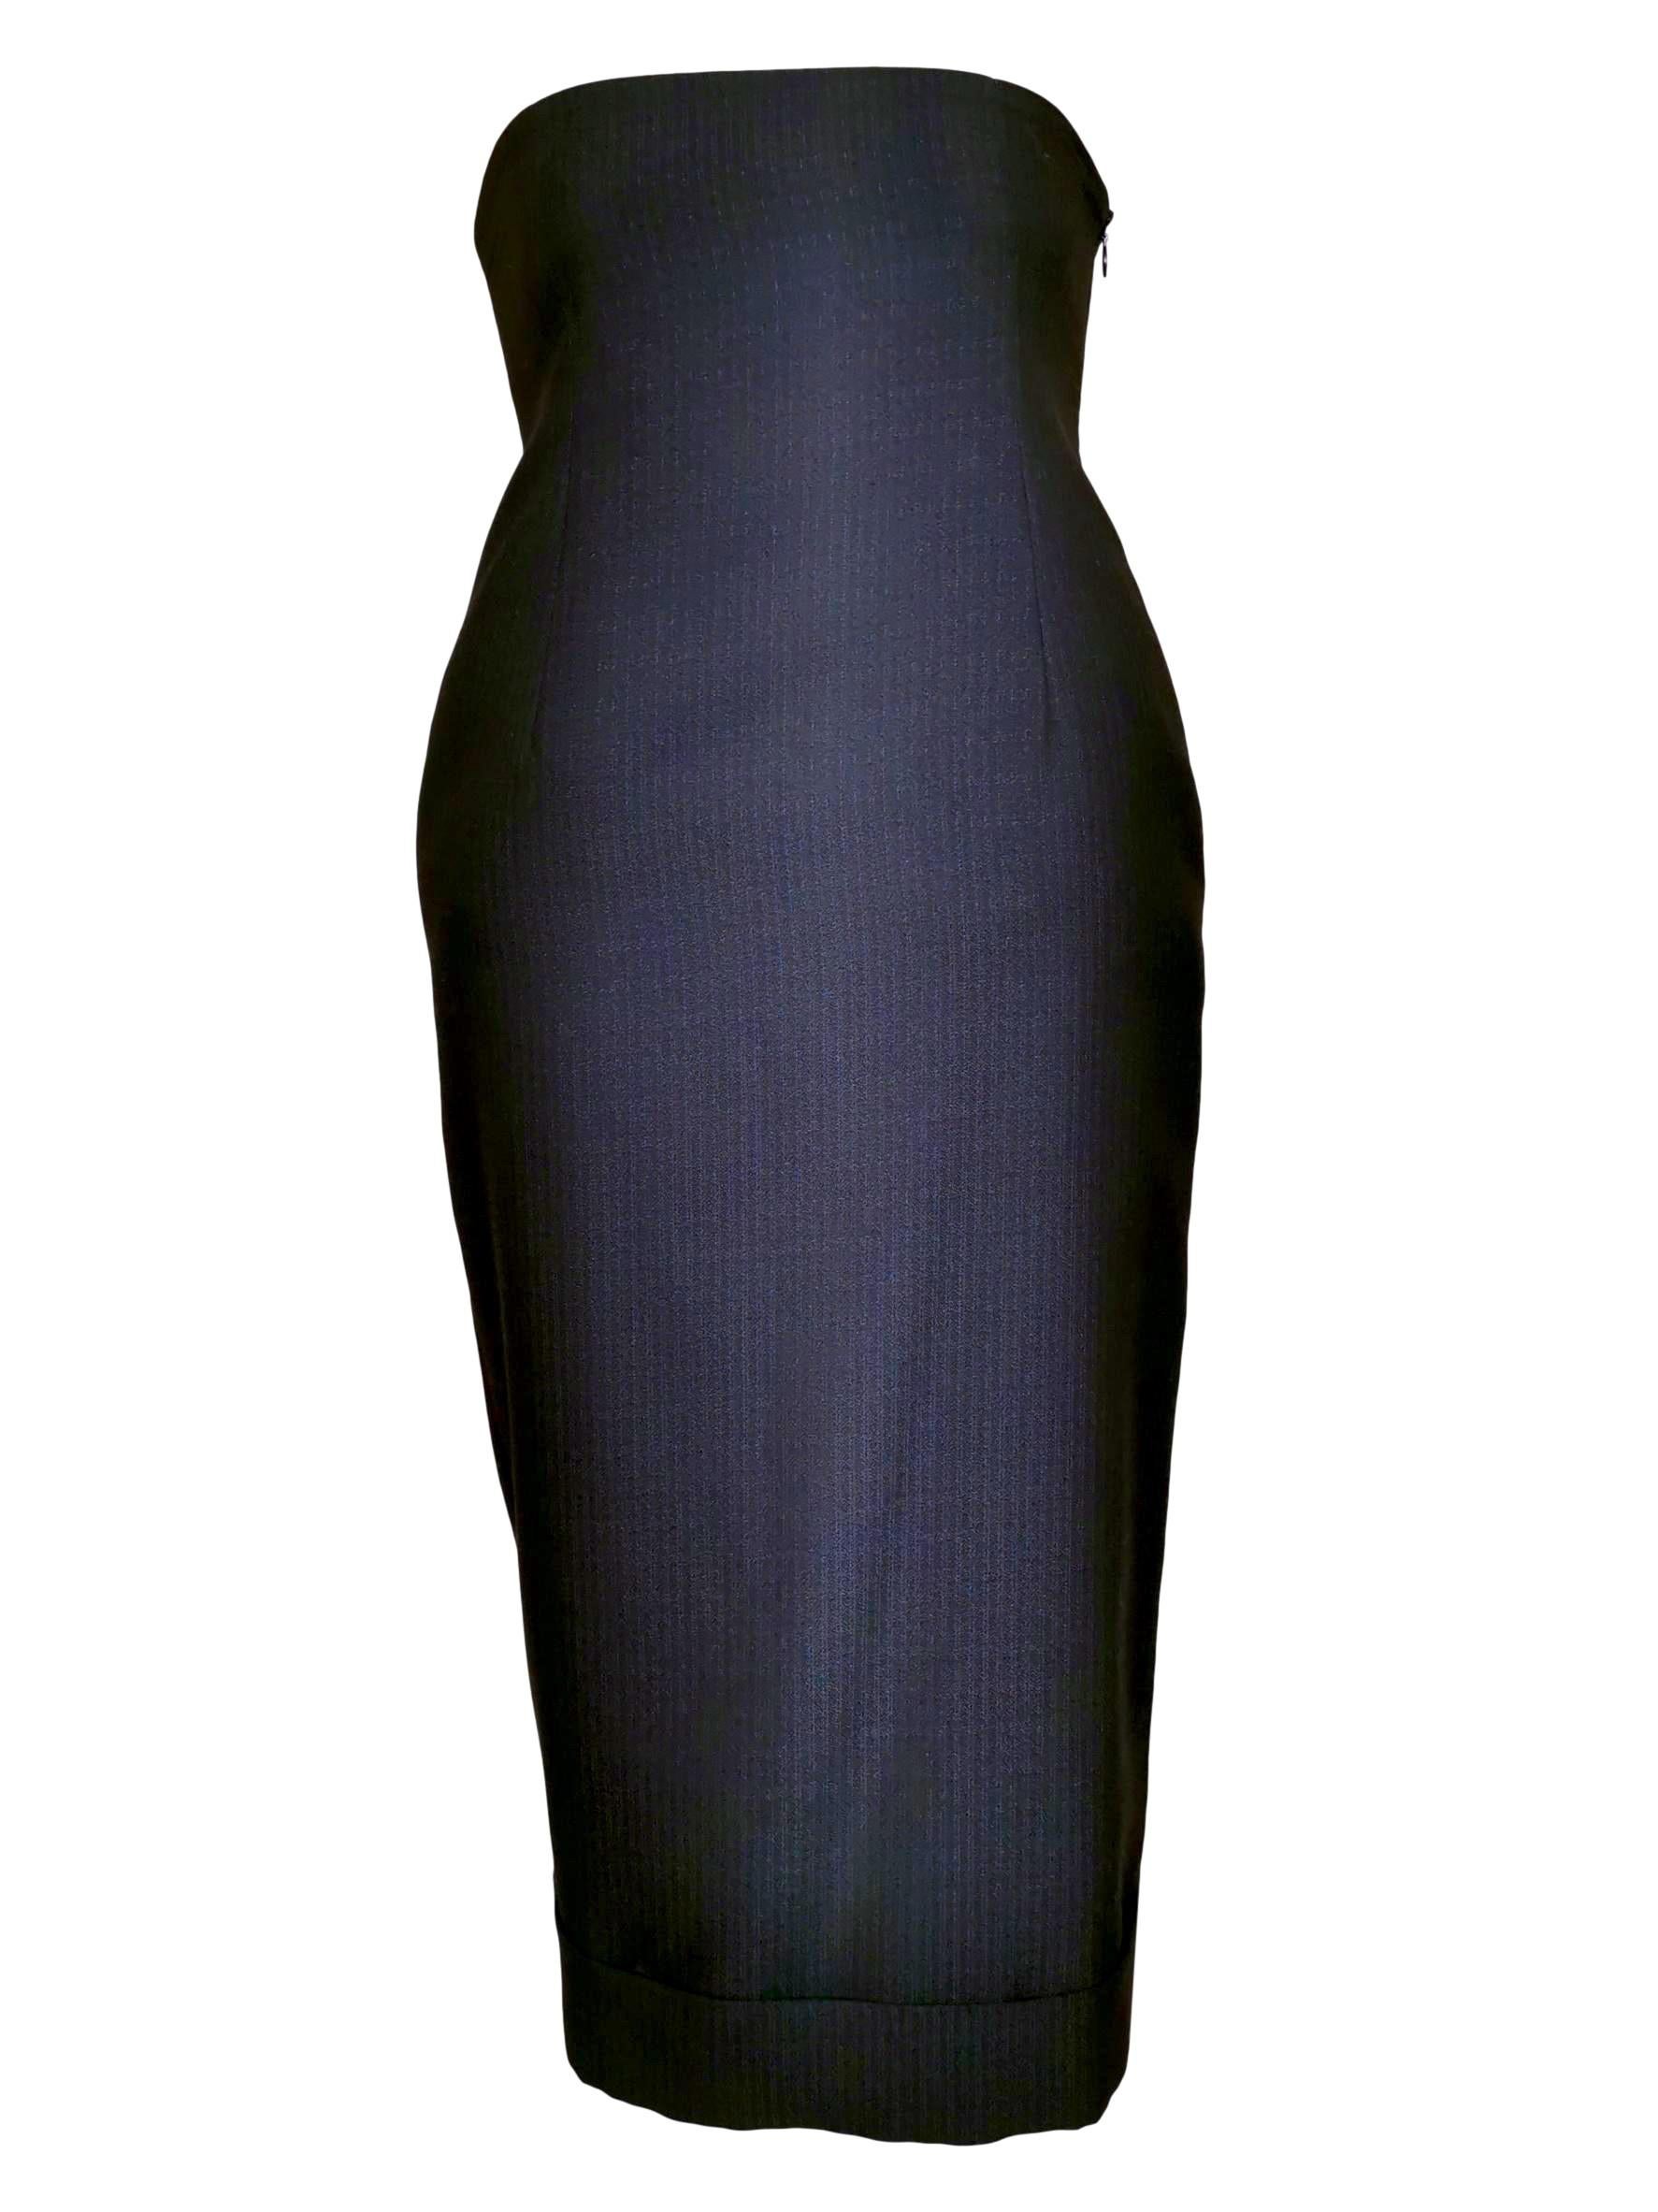 Alexander McQueen 1996 Fitted Dress For Sale 10